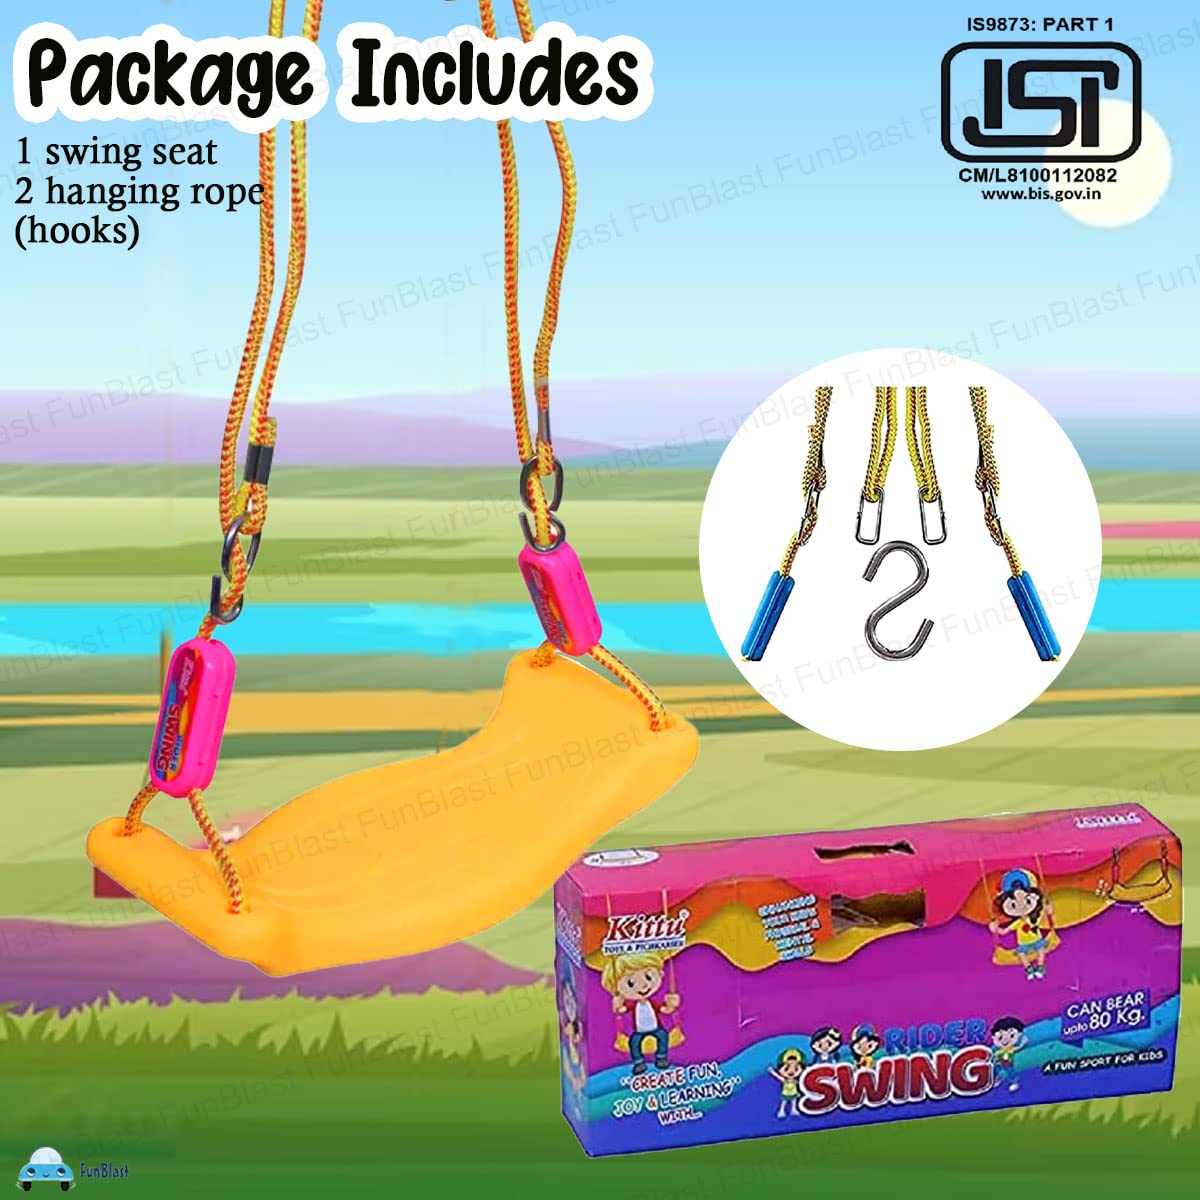 Swing for Kids – Adjustable Plastic Swing/Kid’s Jhula, Indoor and Outdoor Hanging Swing for 3+ Years Old Boys and Girls, Kid's Swing Seat with Hand Grip